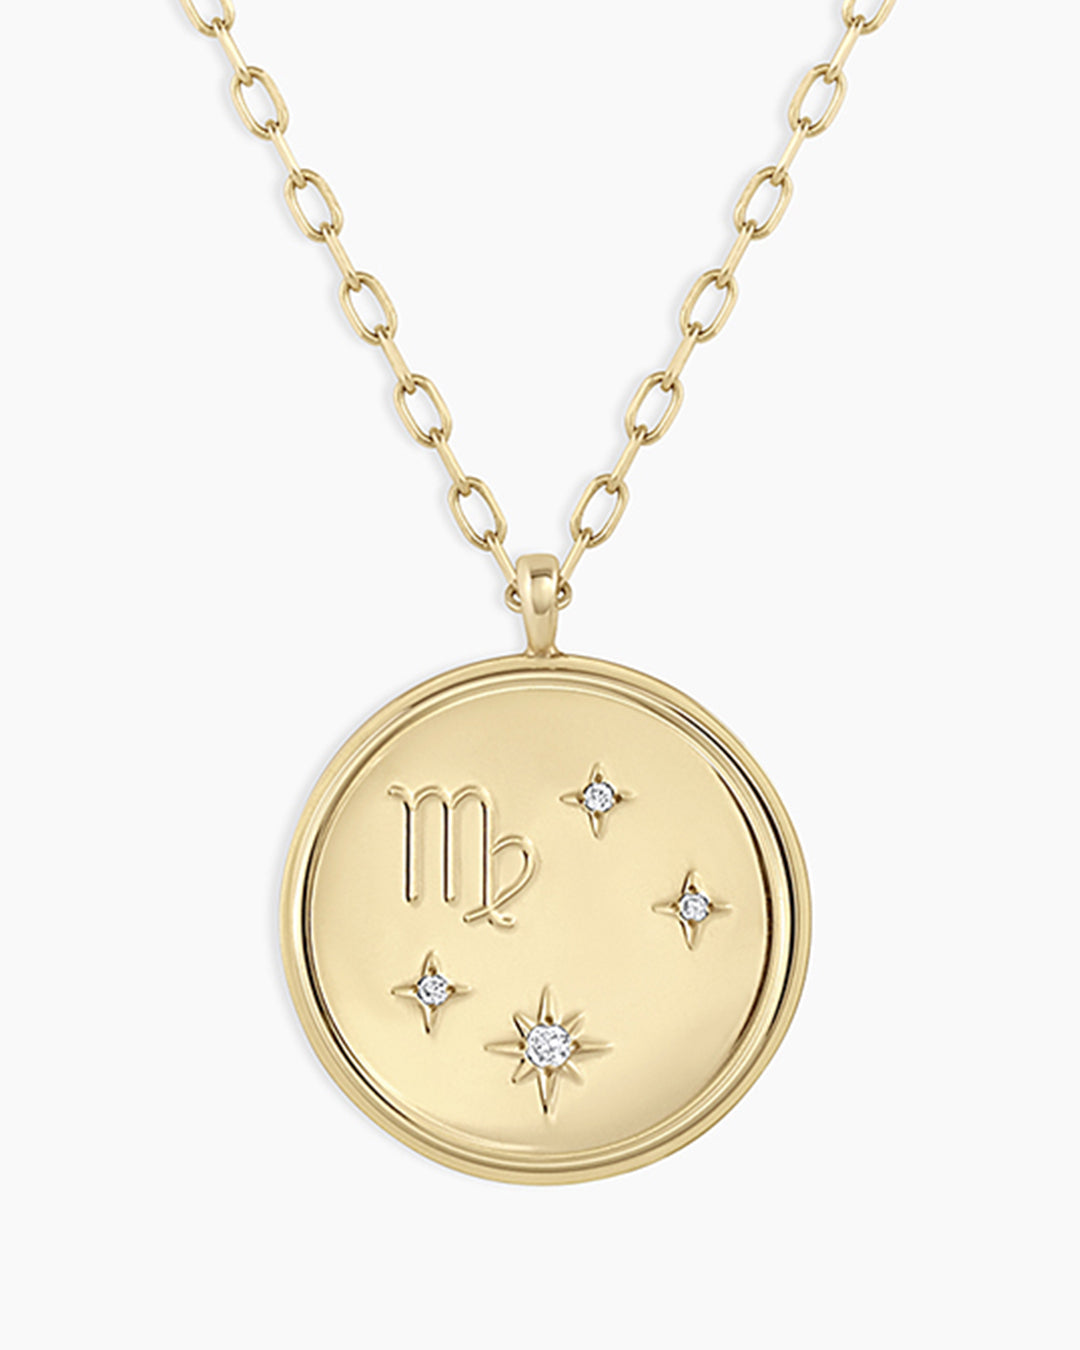 Buy Dainty Virgo Jewelry, Gold Virgo Necklace, Small Virgo Pendant, Virgo  Zodiac Necklace, Virgo Gift for Her, Gold Zodiac Jewelry Astrology Online  in India - Etsy